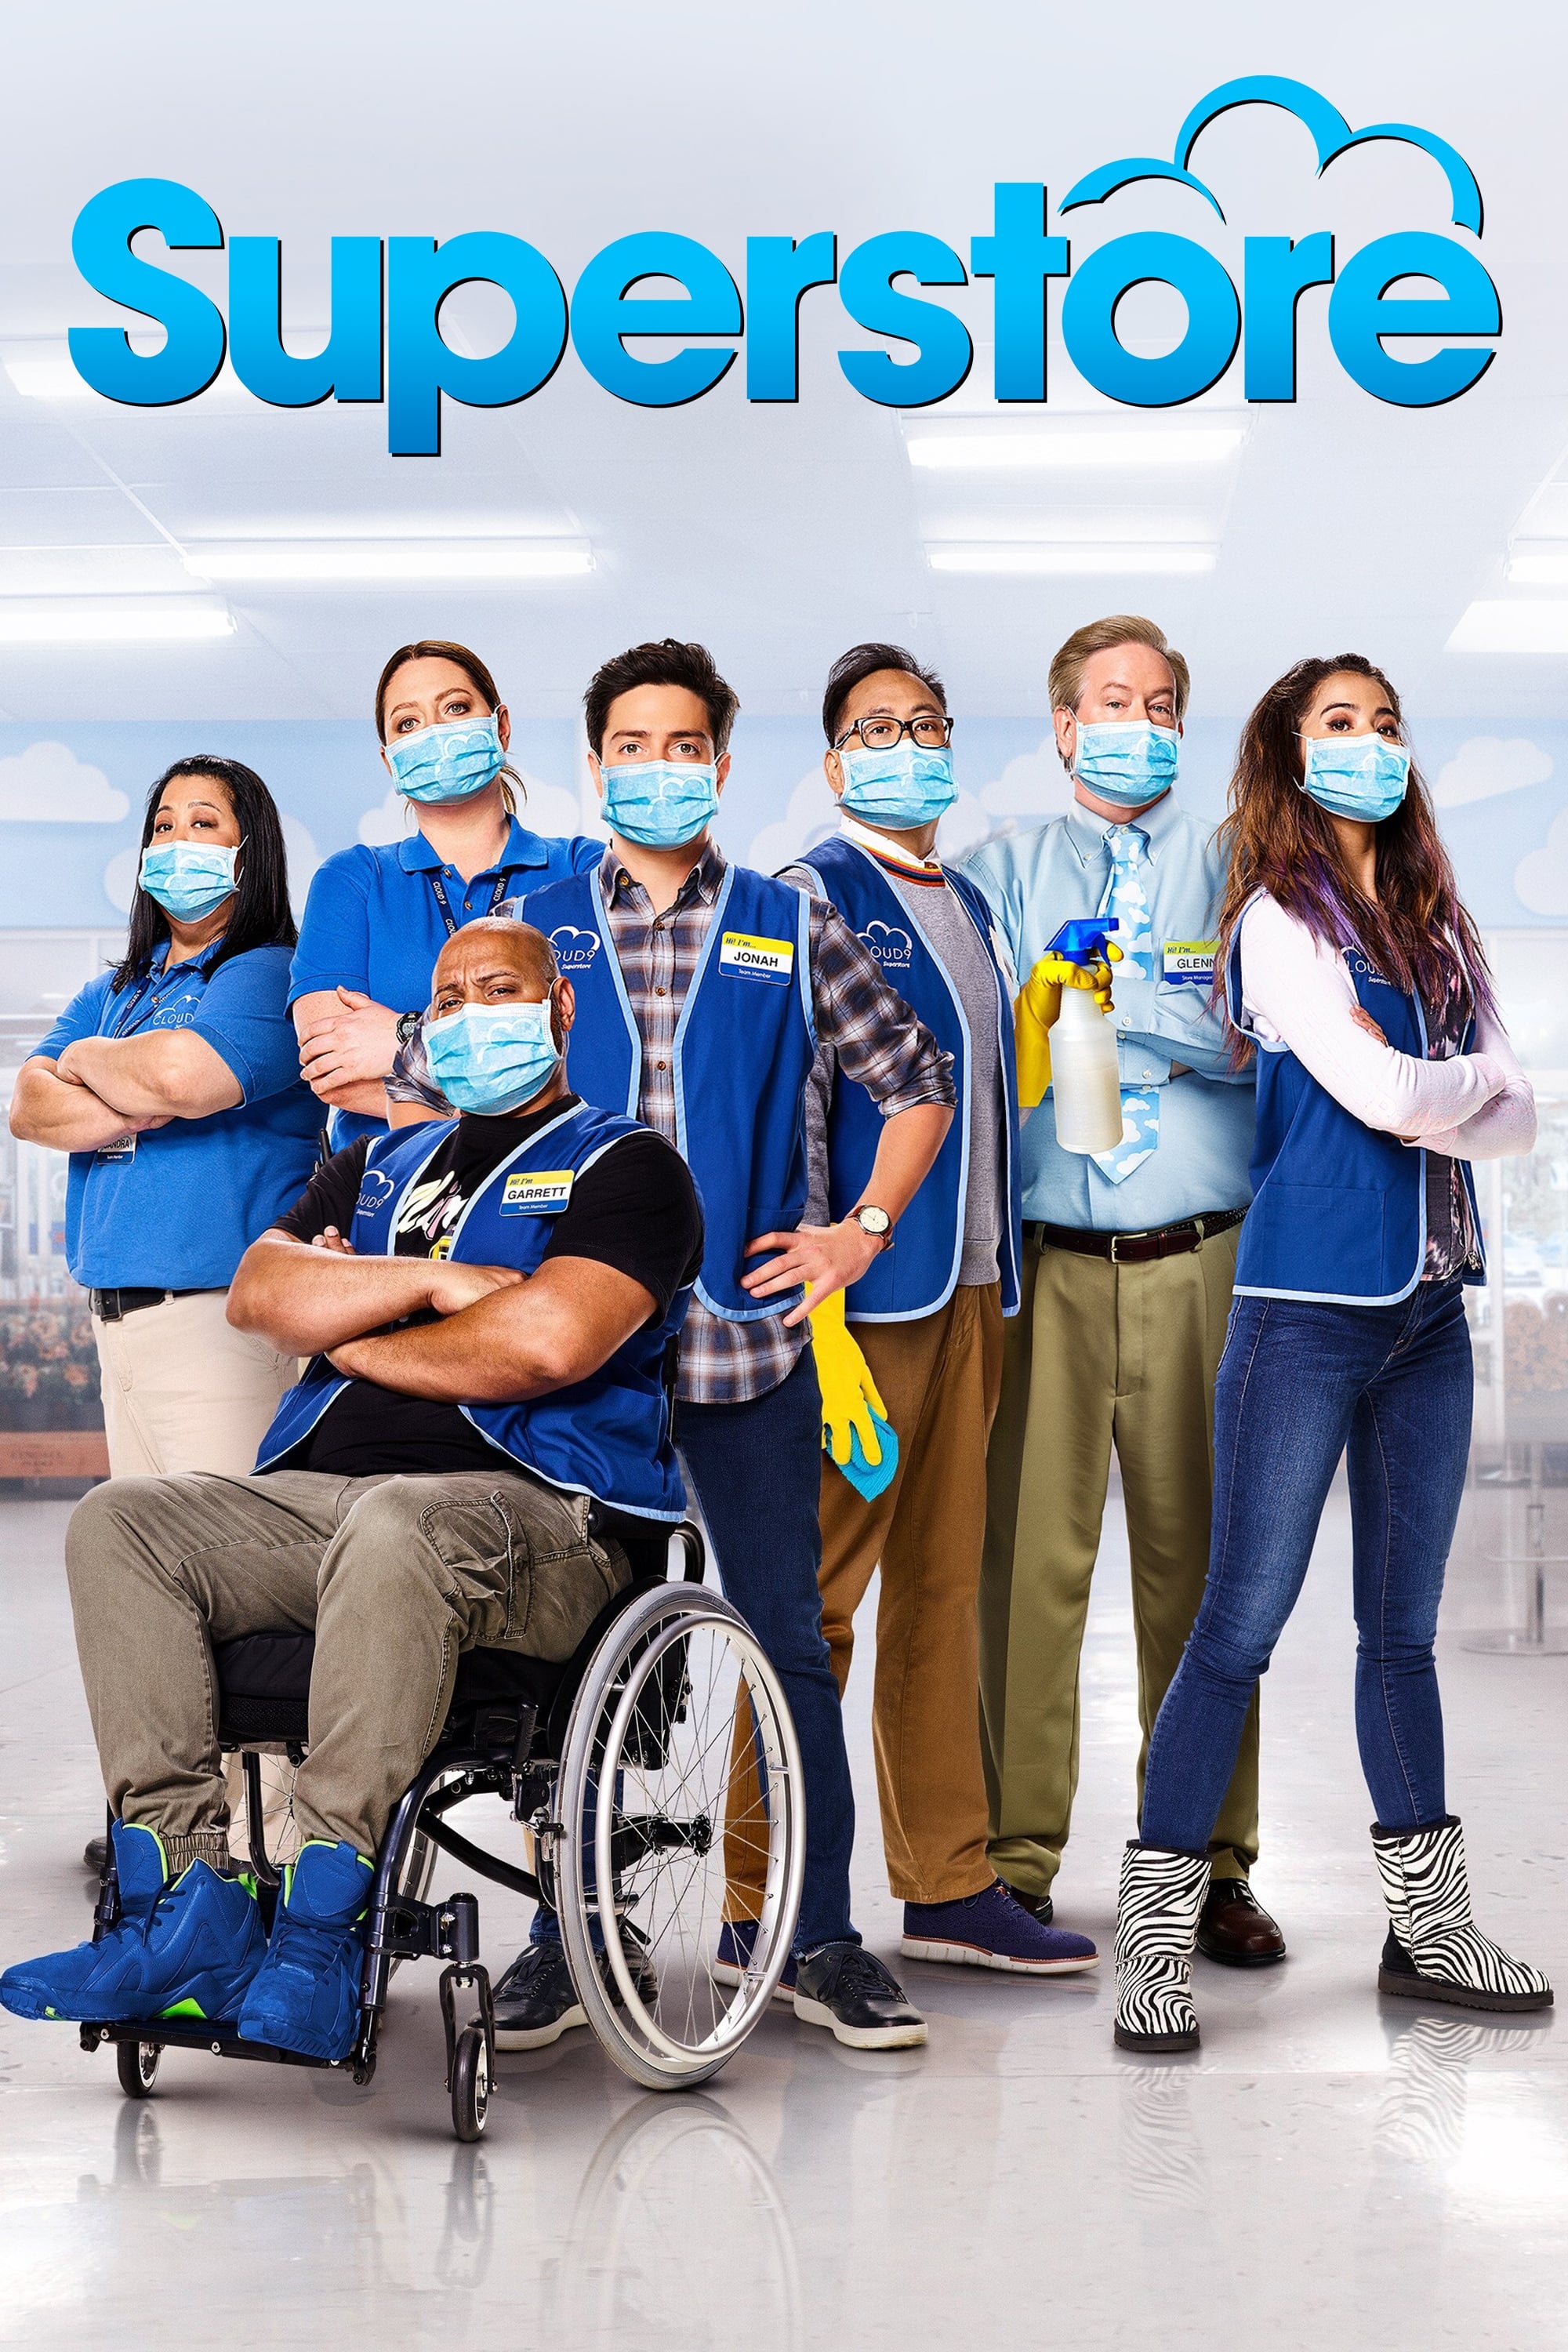 Superstore TV Shows About Workplace Comedy